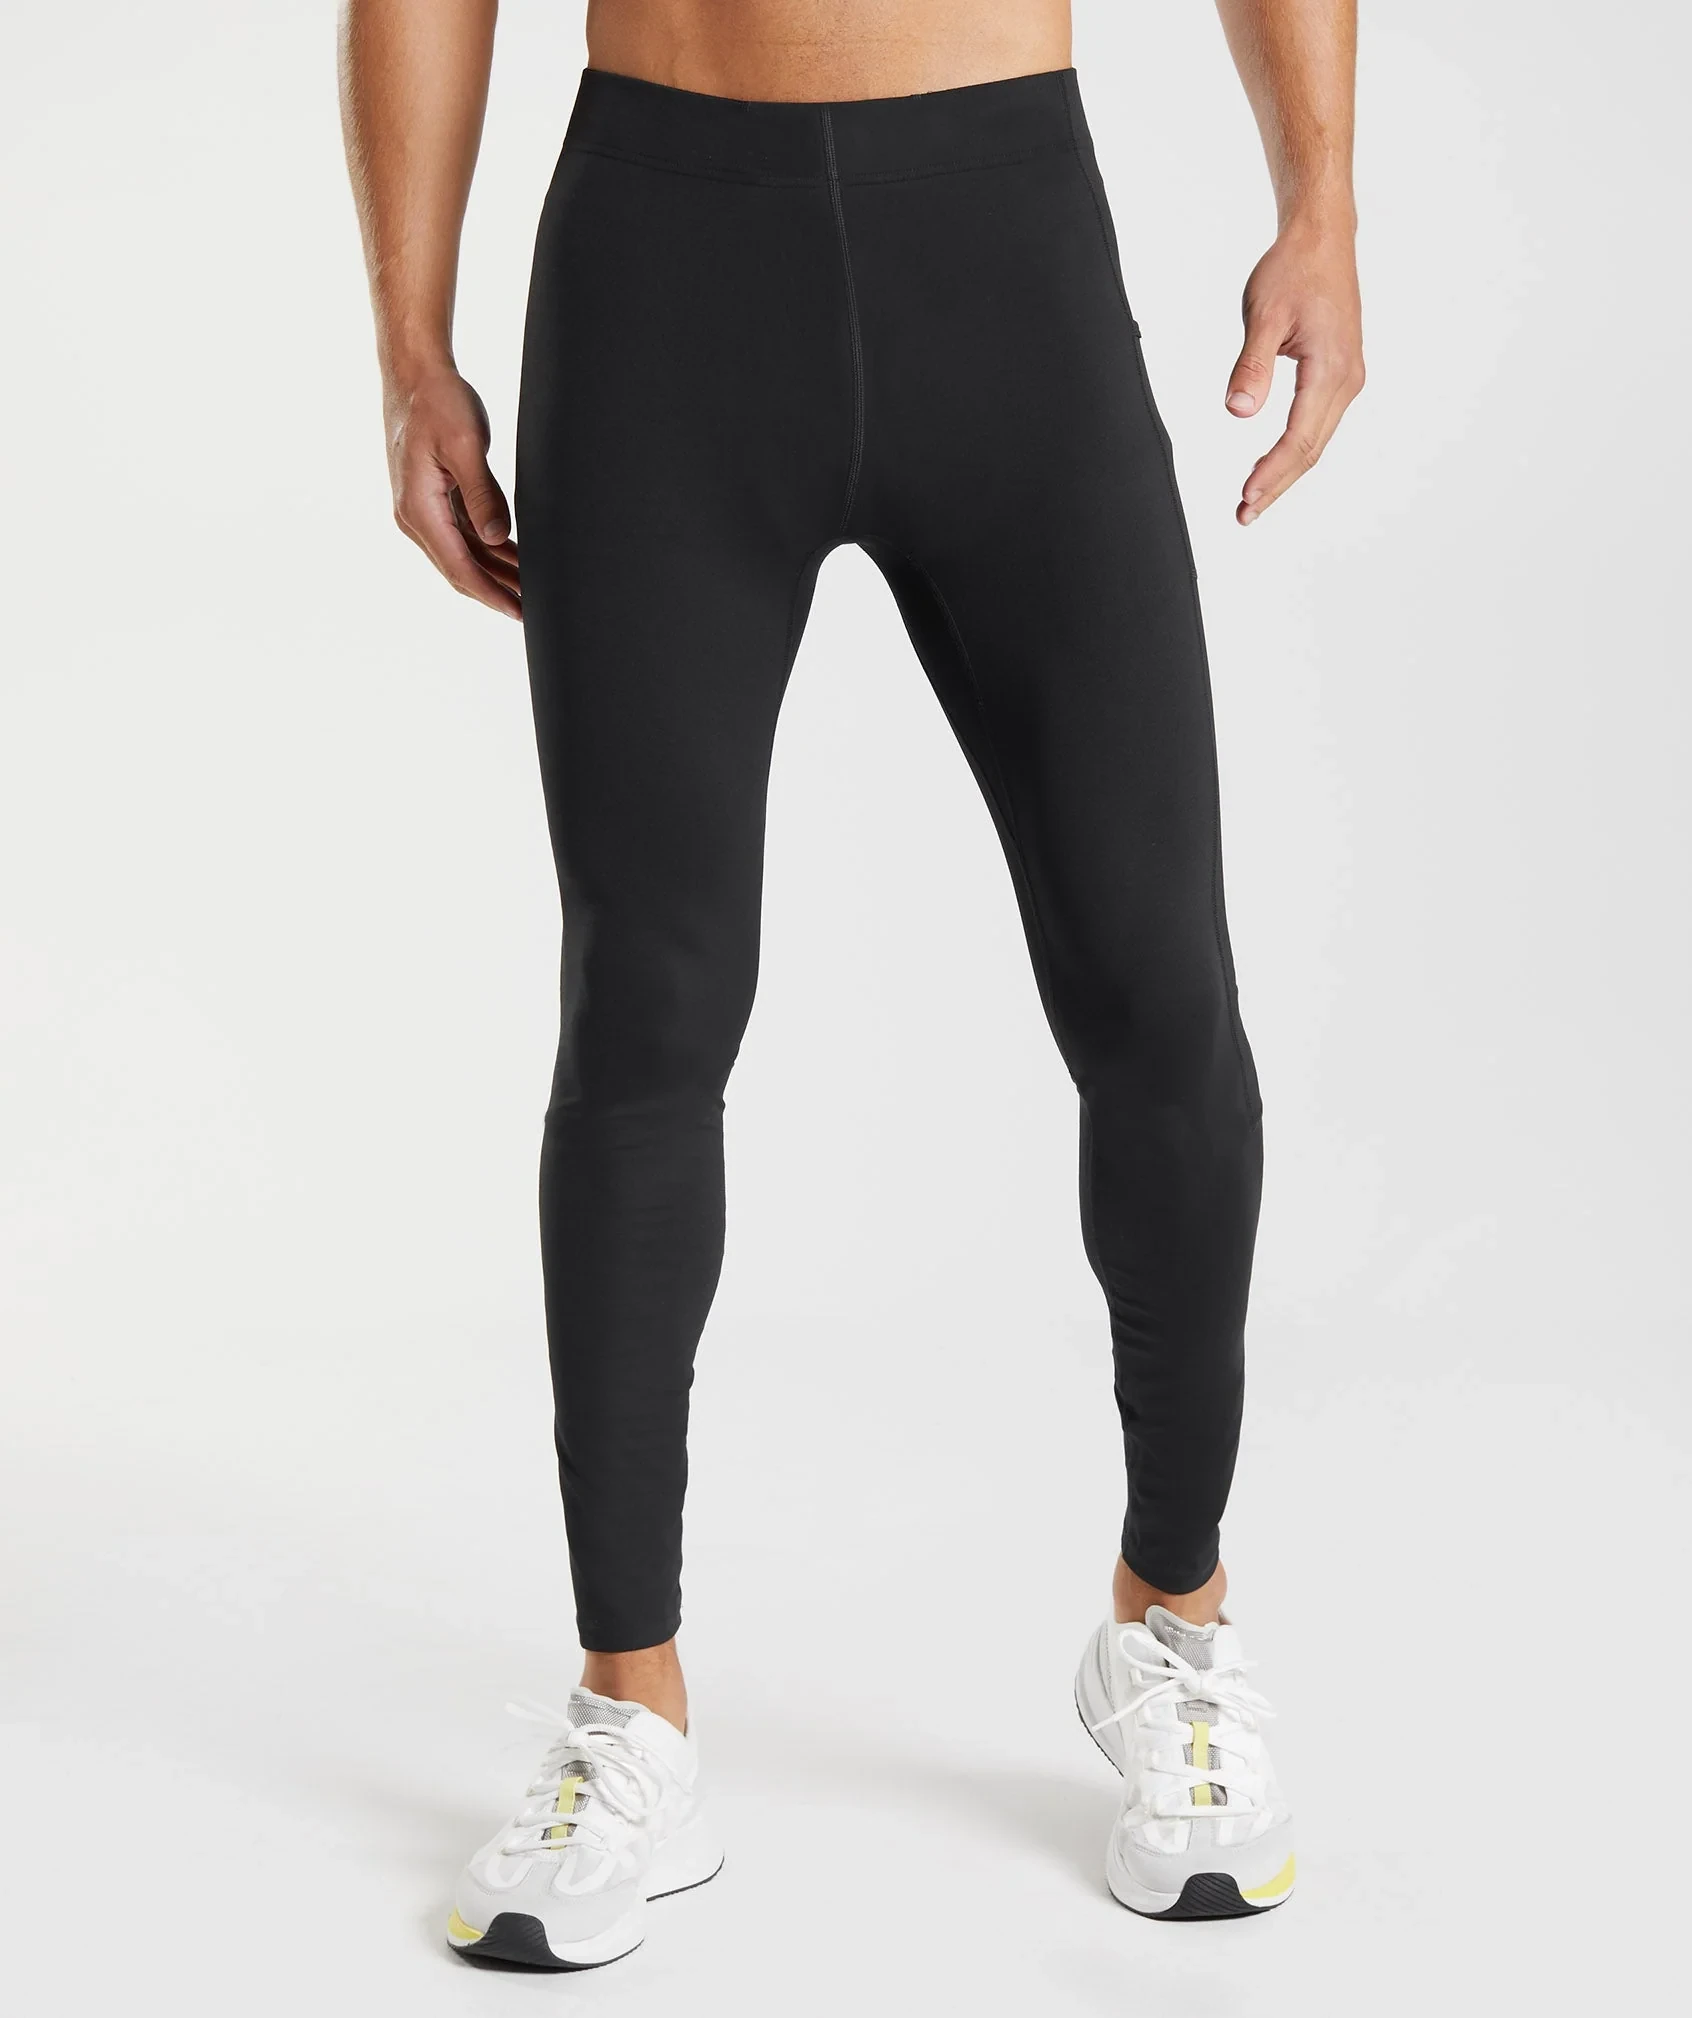 Jogger Sports Official Store - Gym Clothes & Workout Wear